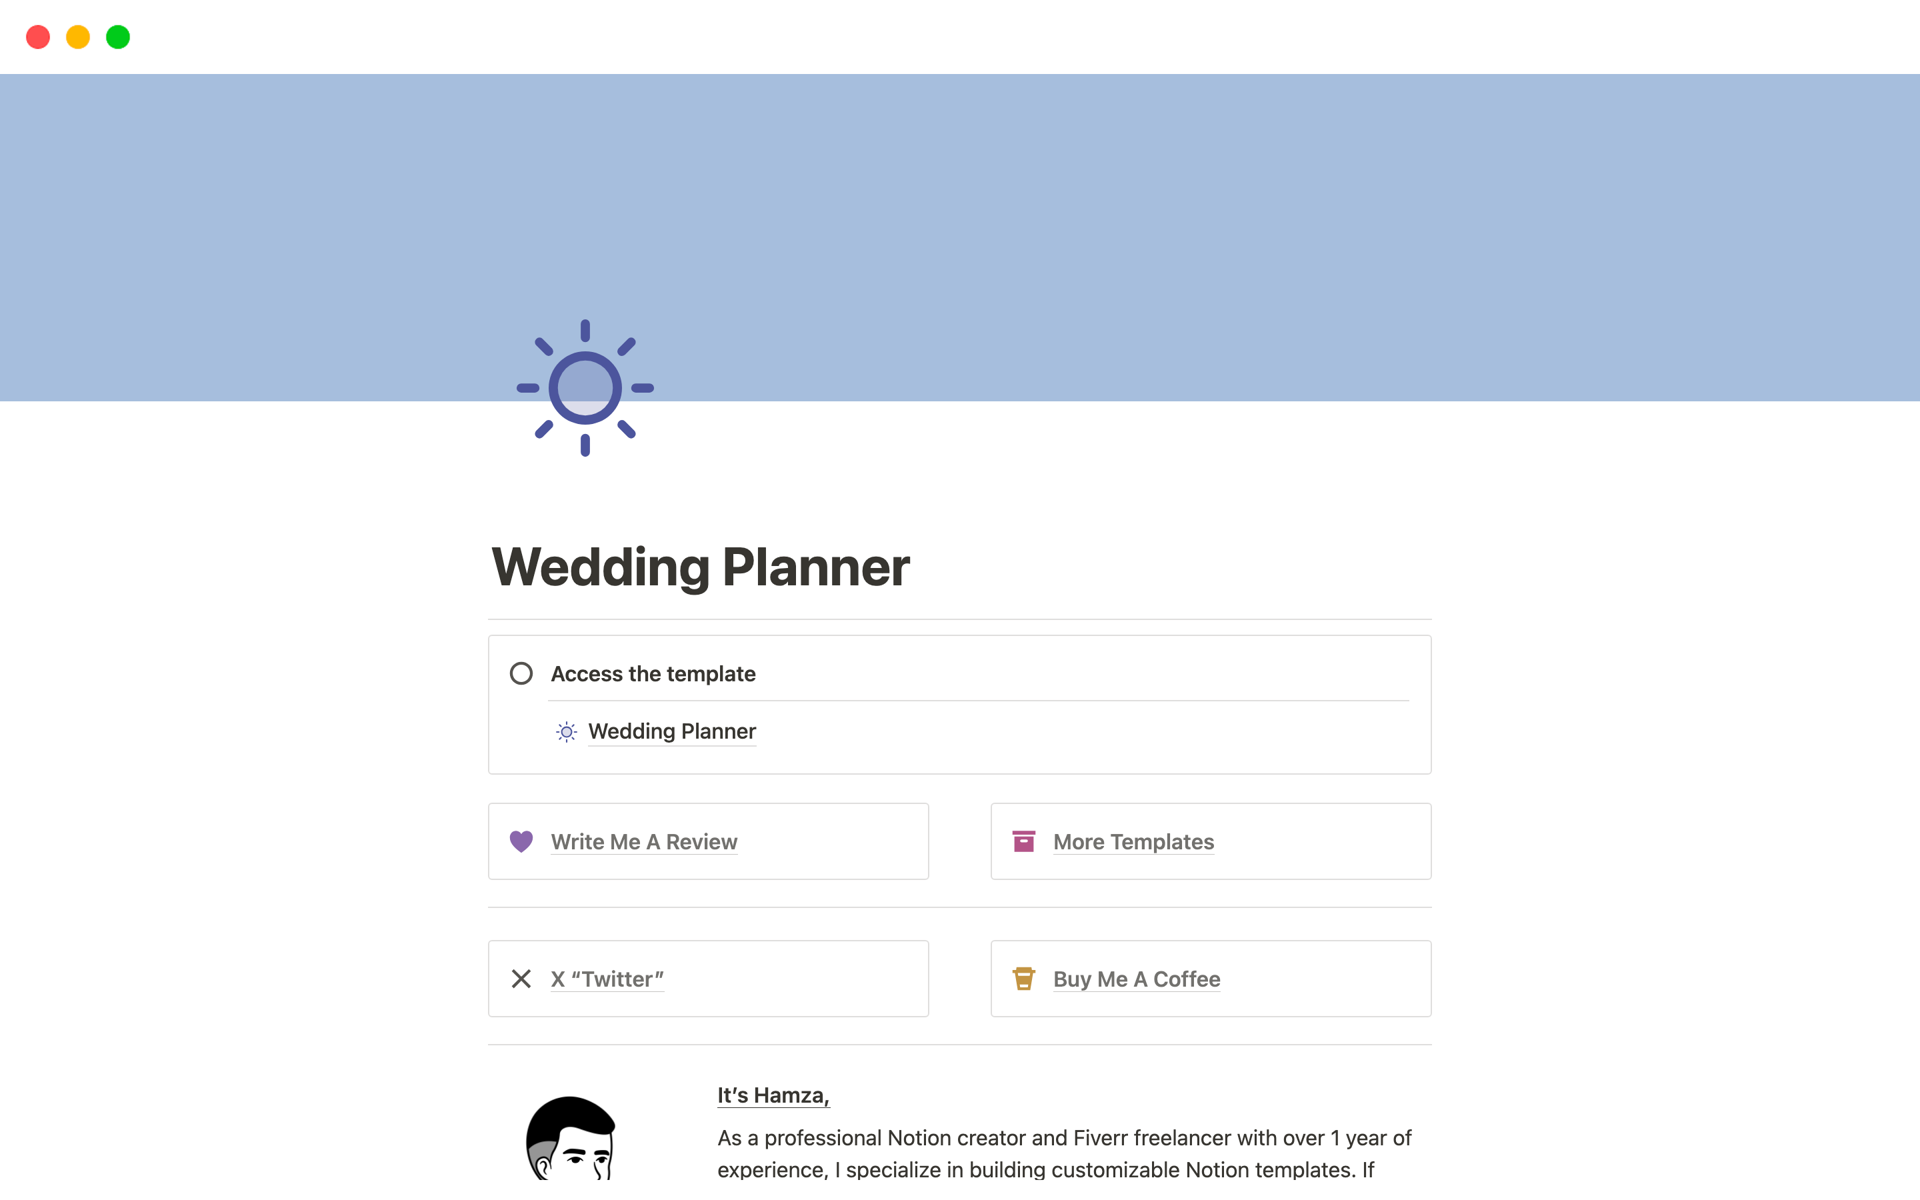 Simplify and enhance the wedding planning journey.